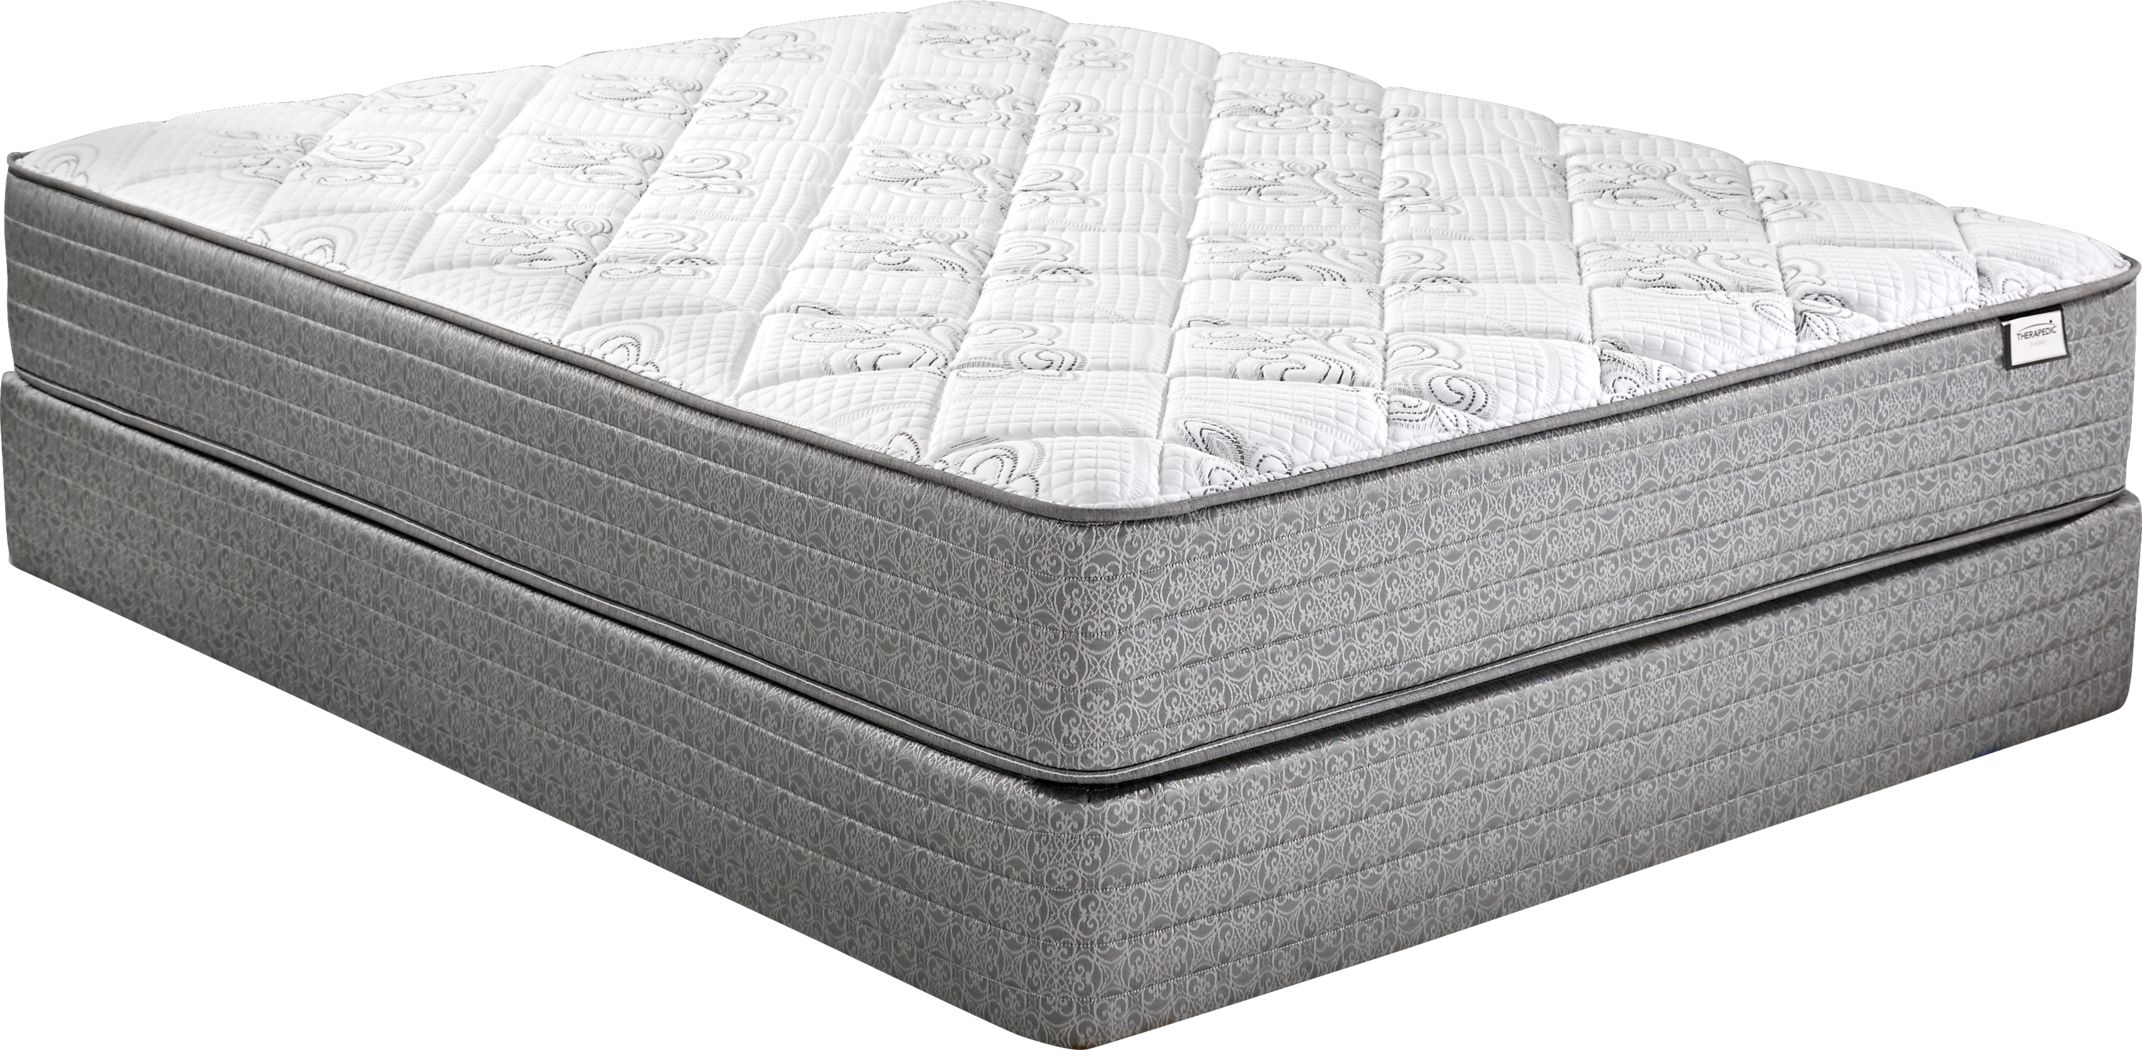 Therapedic Everest Low Profile Queen Mattress Set - Rooms To Go